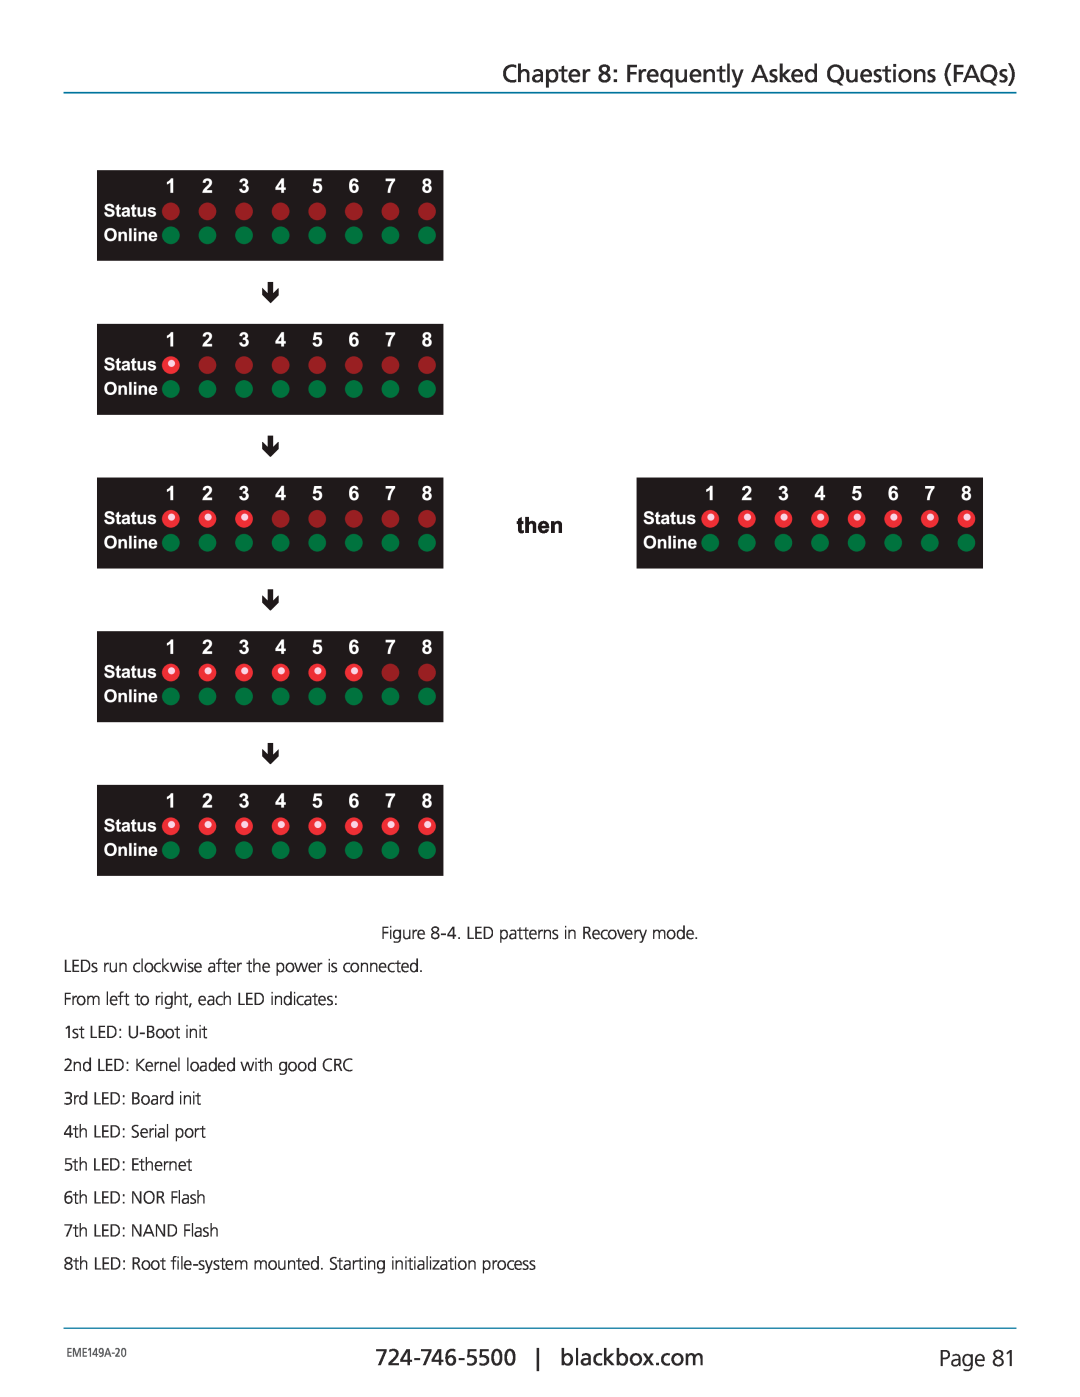 Black Box EME149D-20 manual Frequently Asked Questions FAQs, Page, 4. LED patterns in Recovery mode, 7th LED NAND Flash 